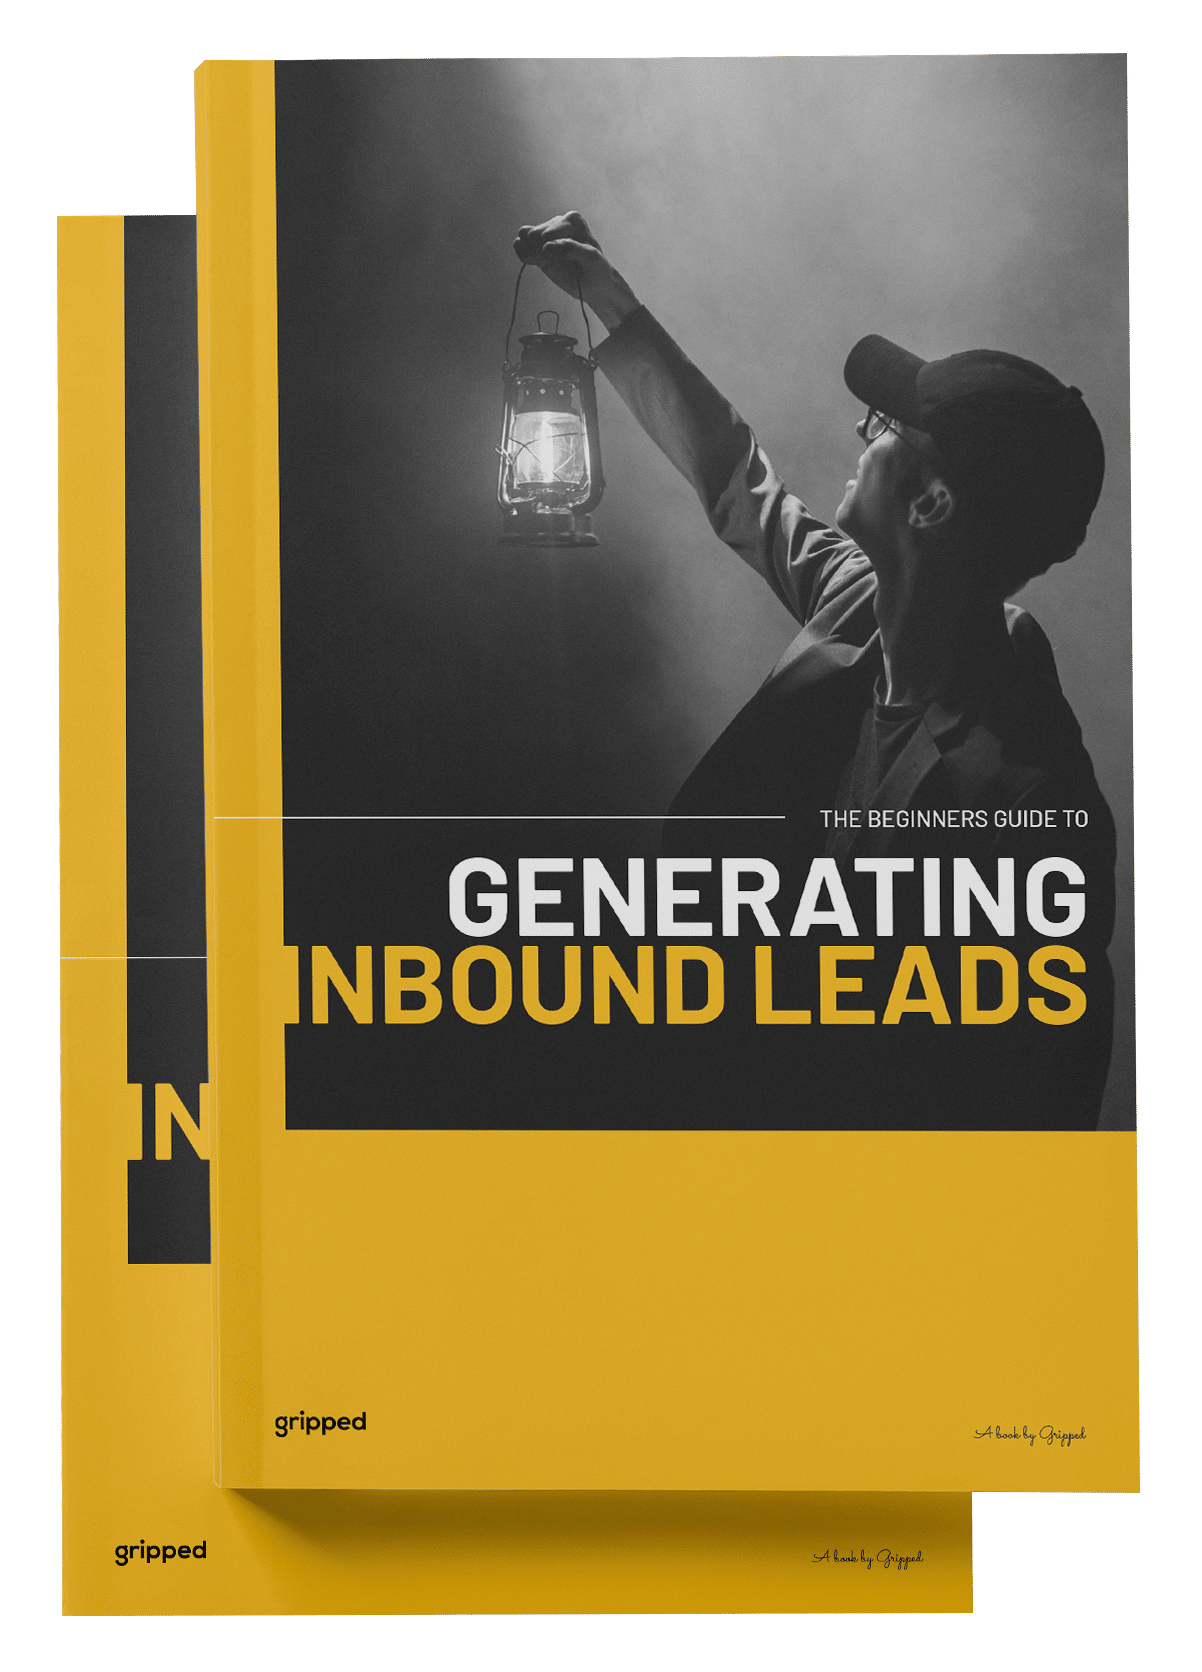 The-Beginners-Guide-to-Generating-Inbound-Leads